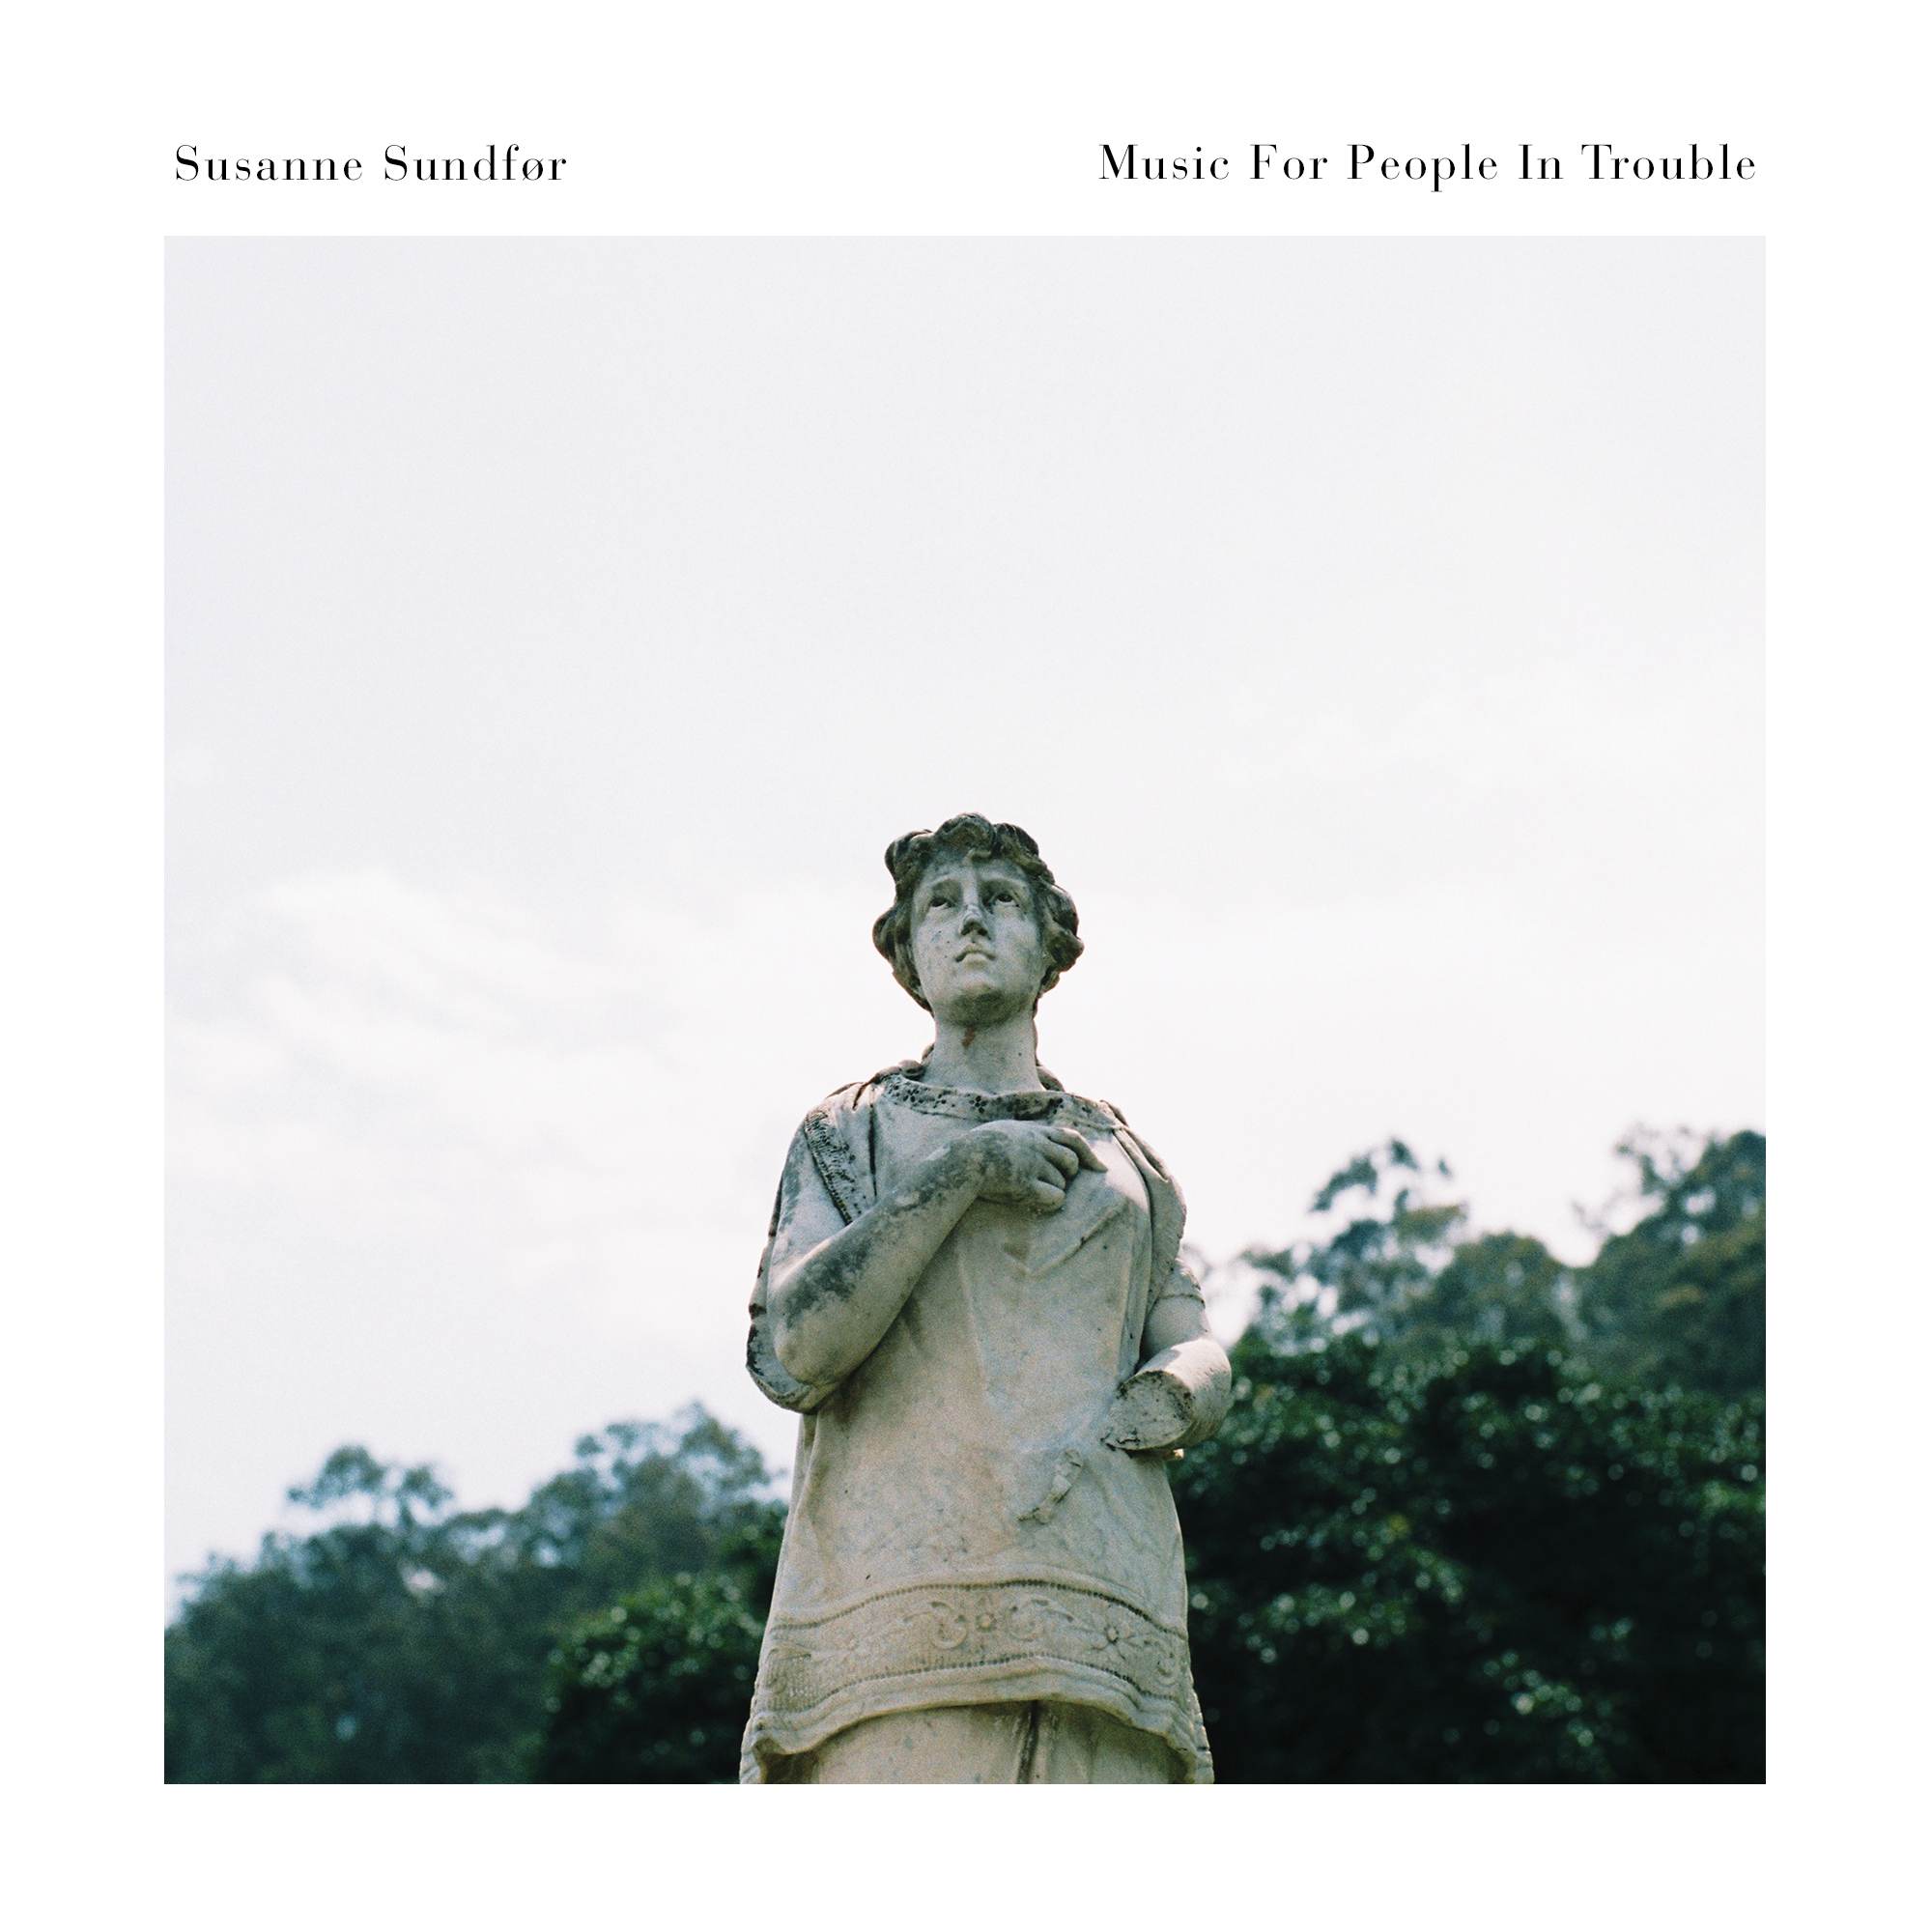 Our review of 'Music For People In Trouble' by Susanne Sundfør